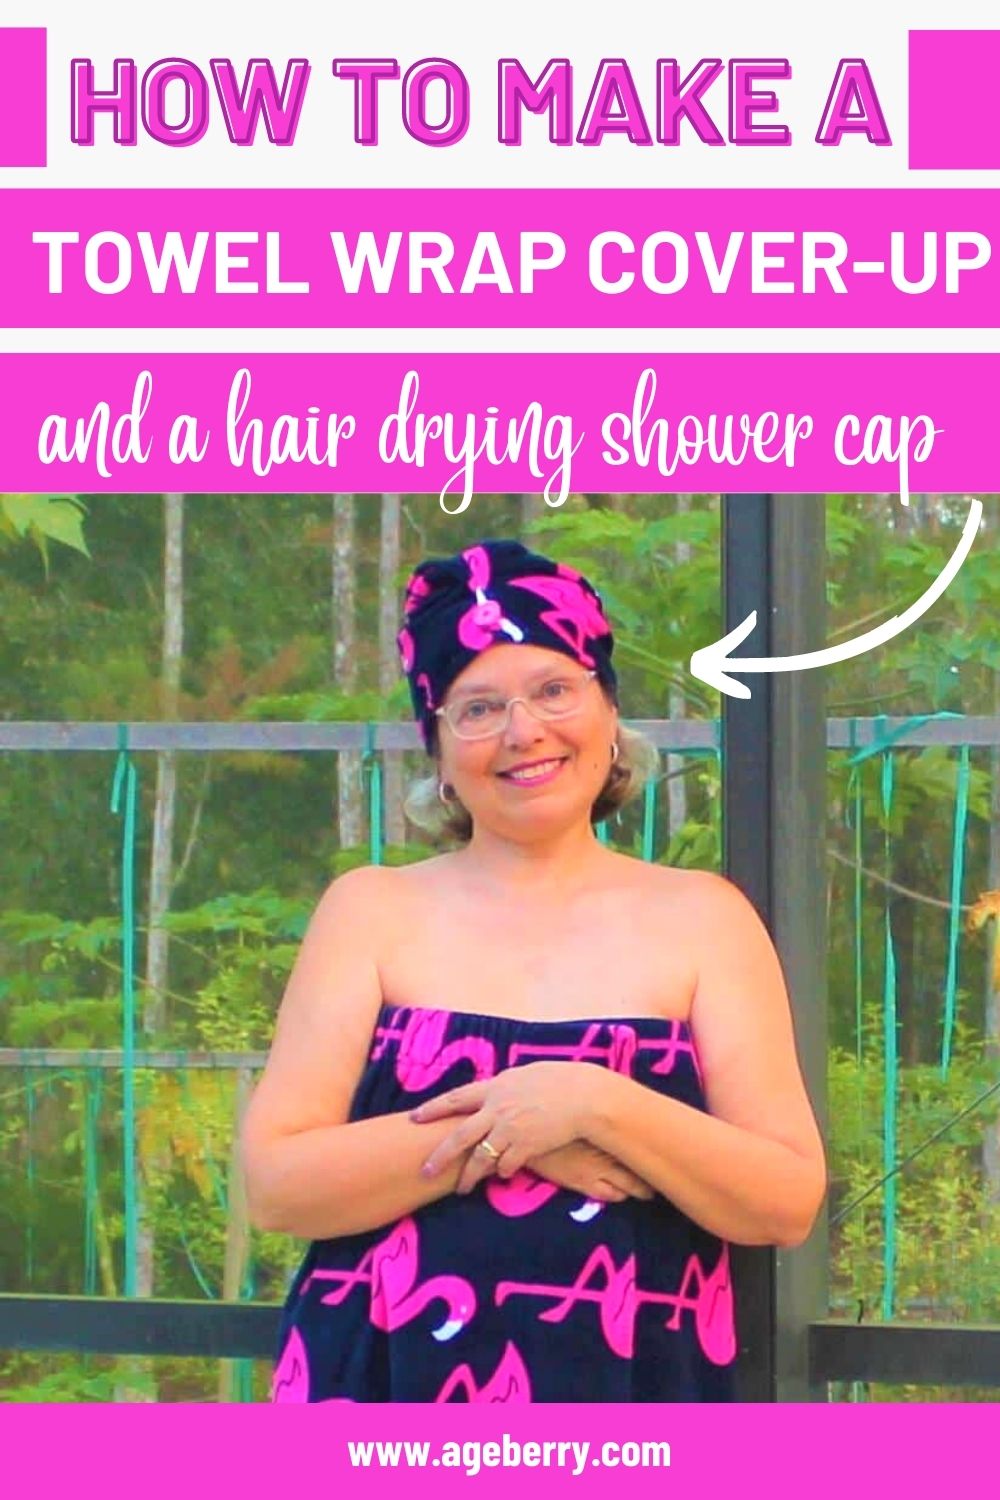 Hair Drying Shower Cap From Terry Towels